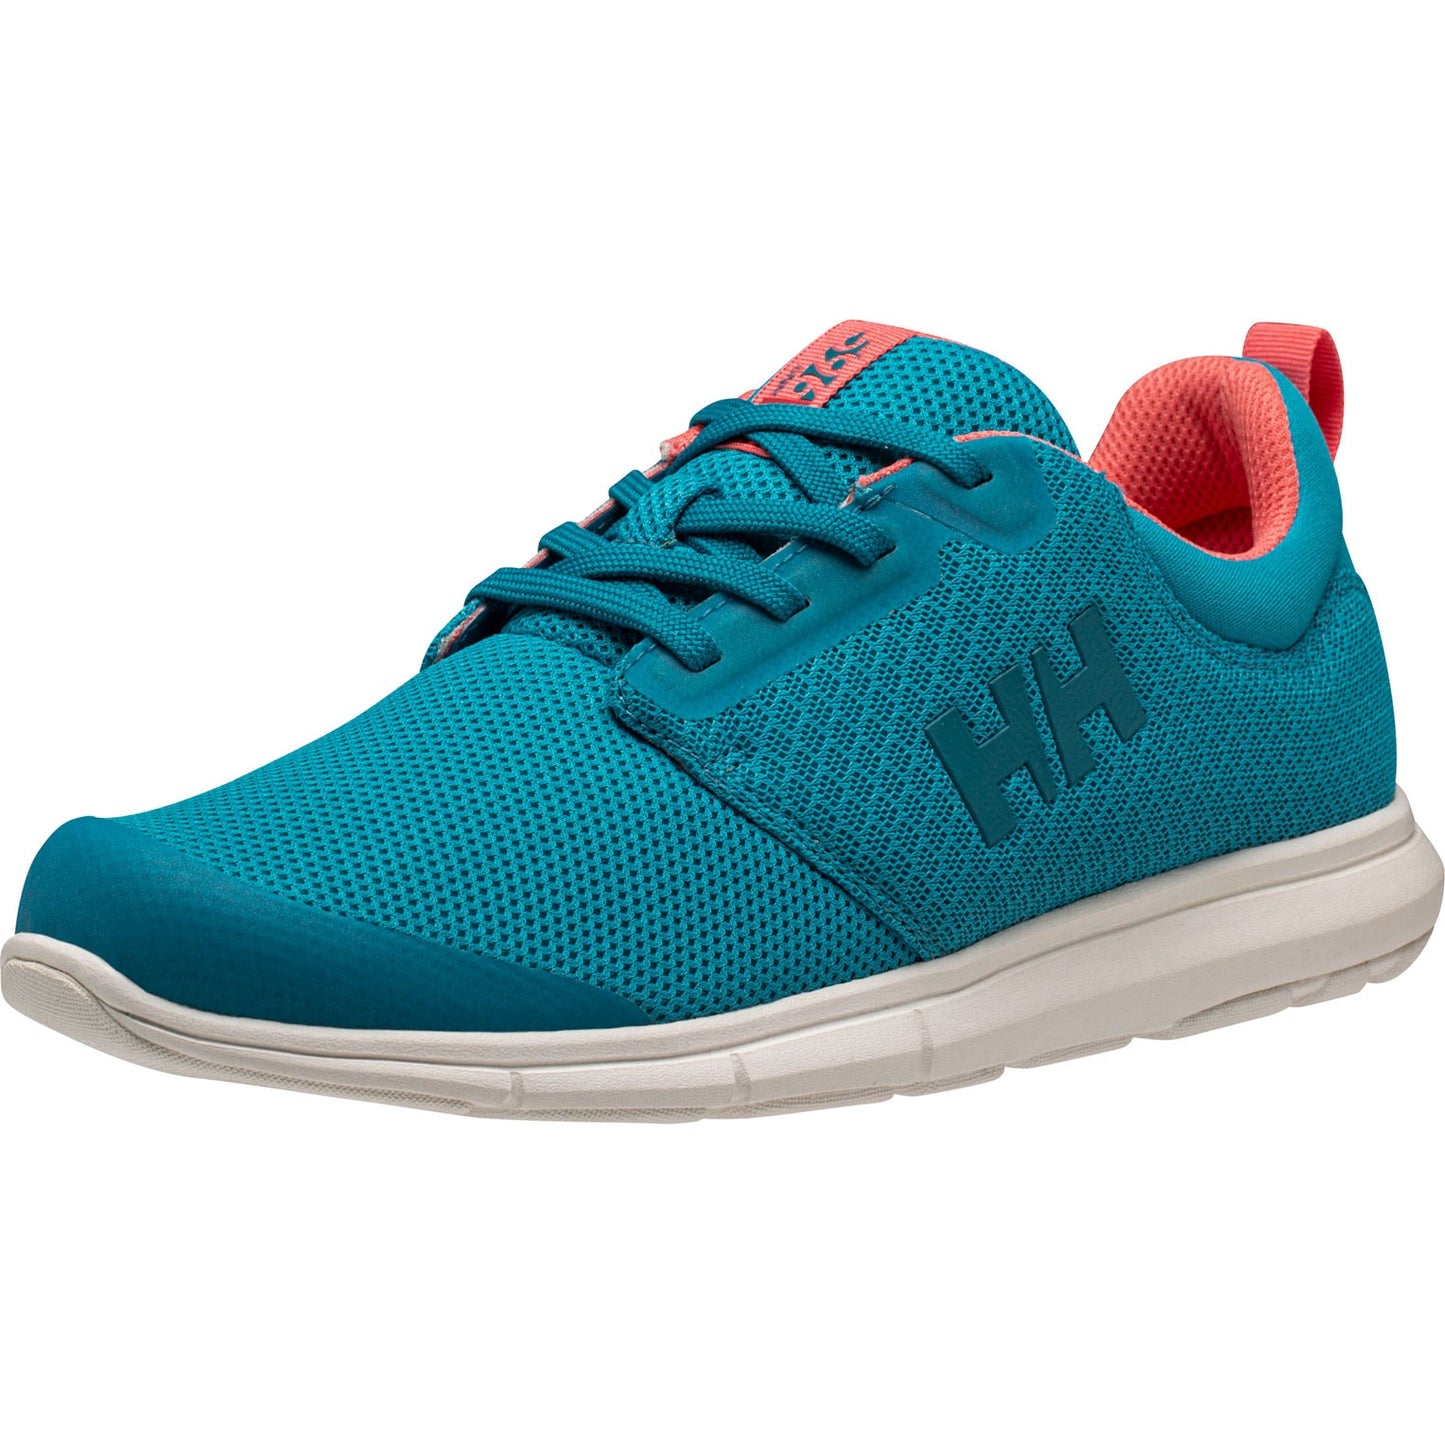 Helly Hansen Women's Feathering Trainers